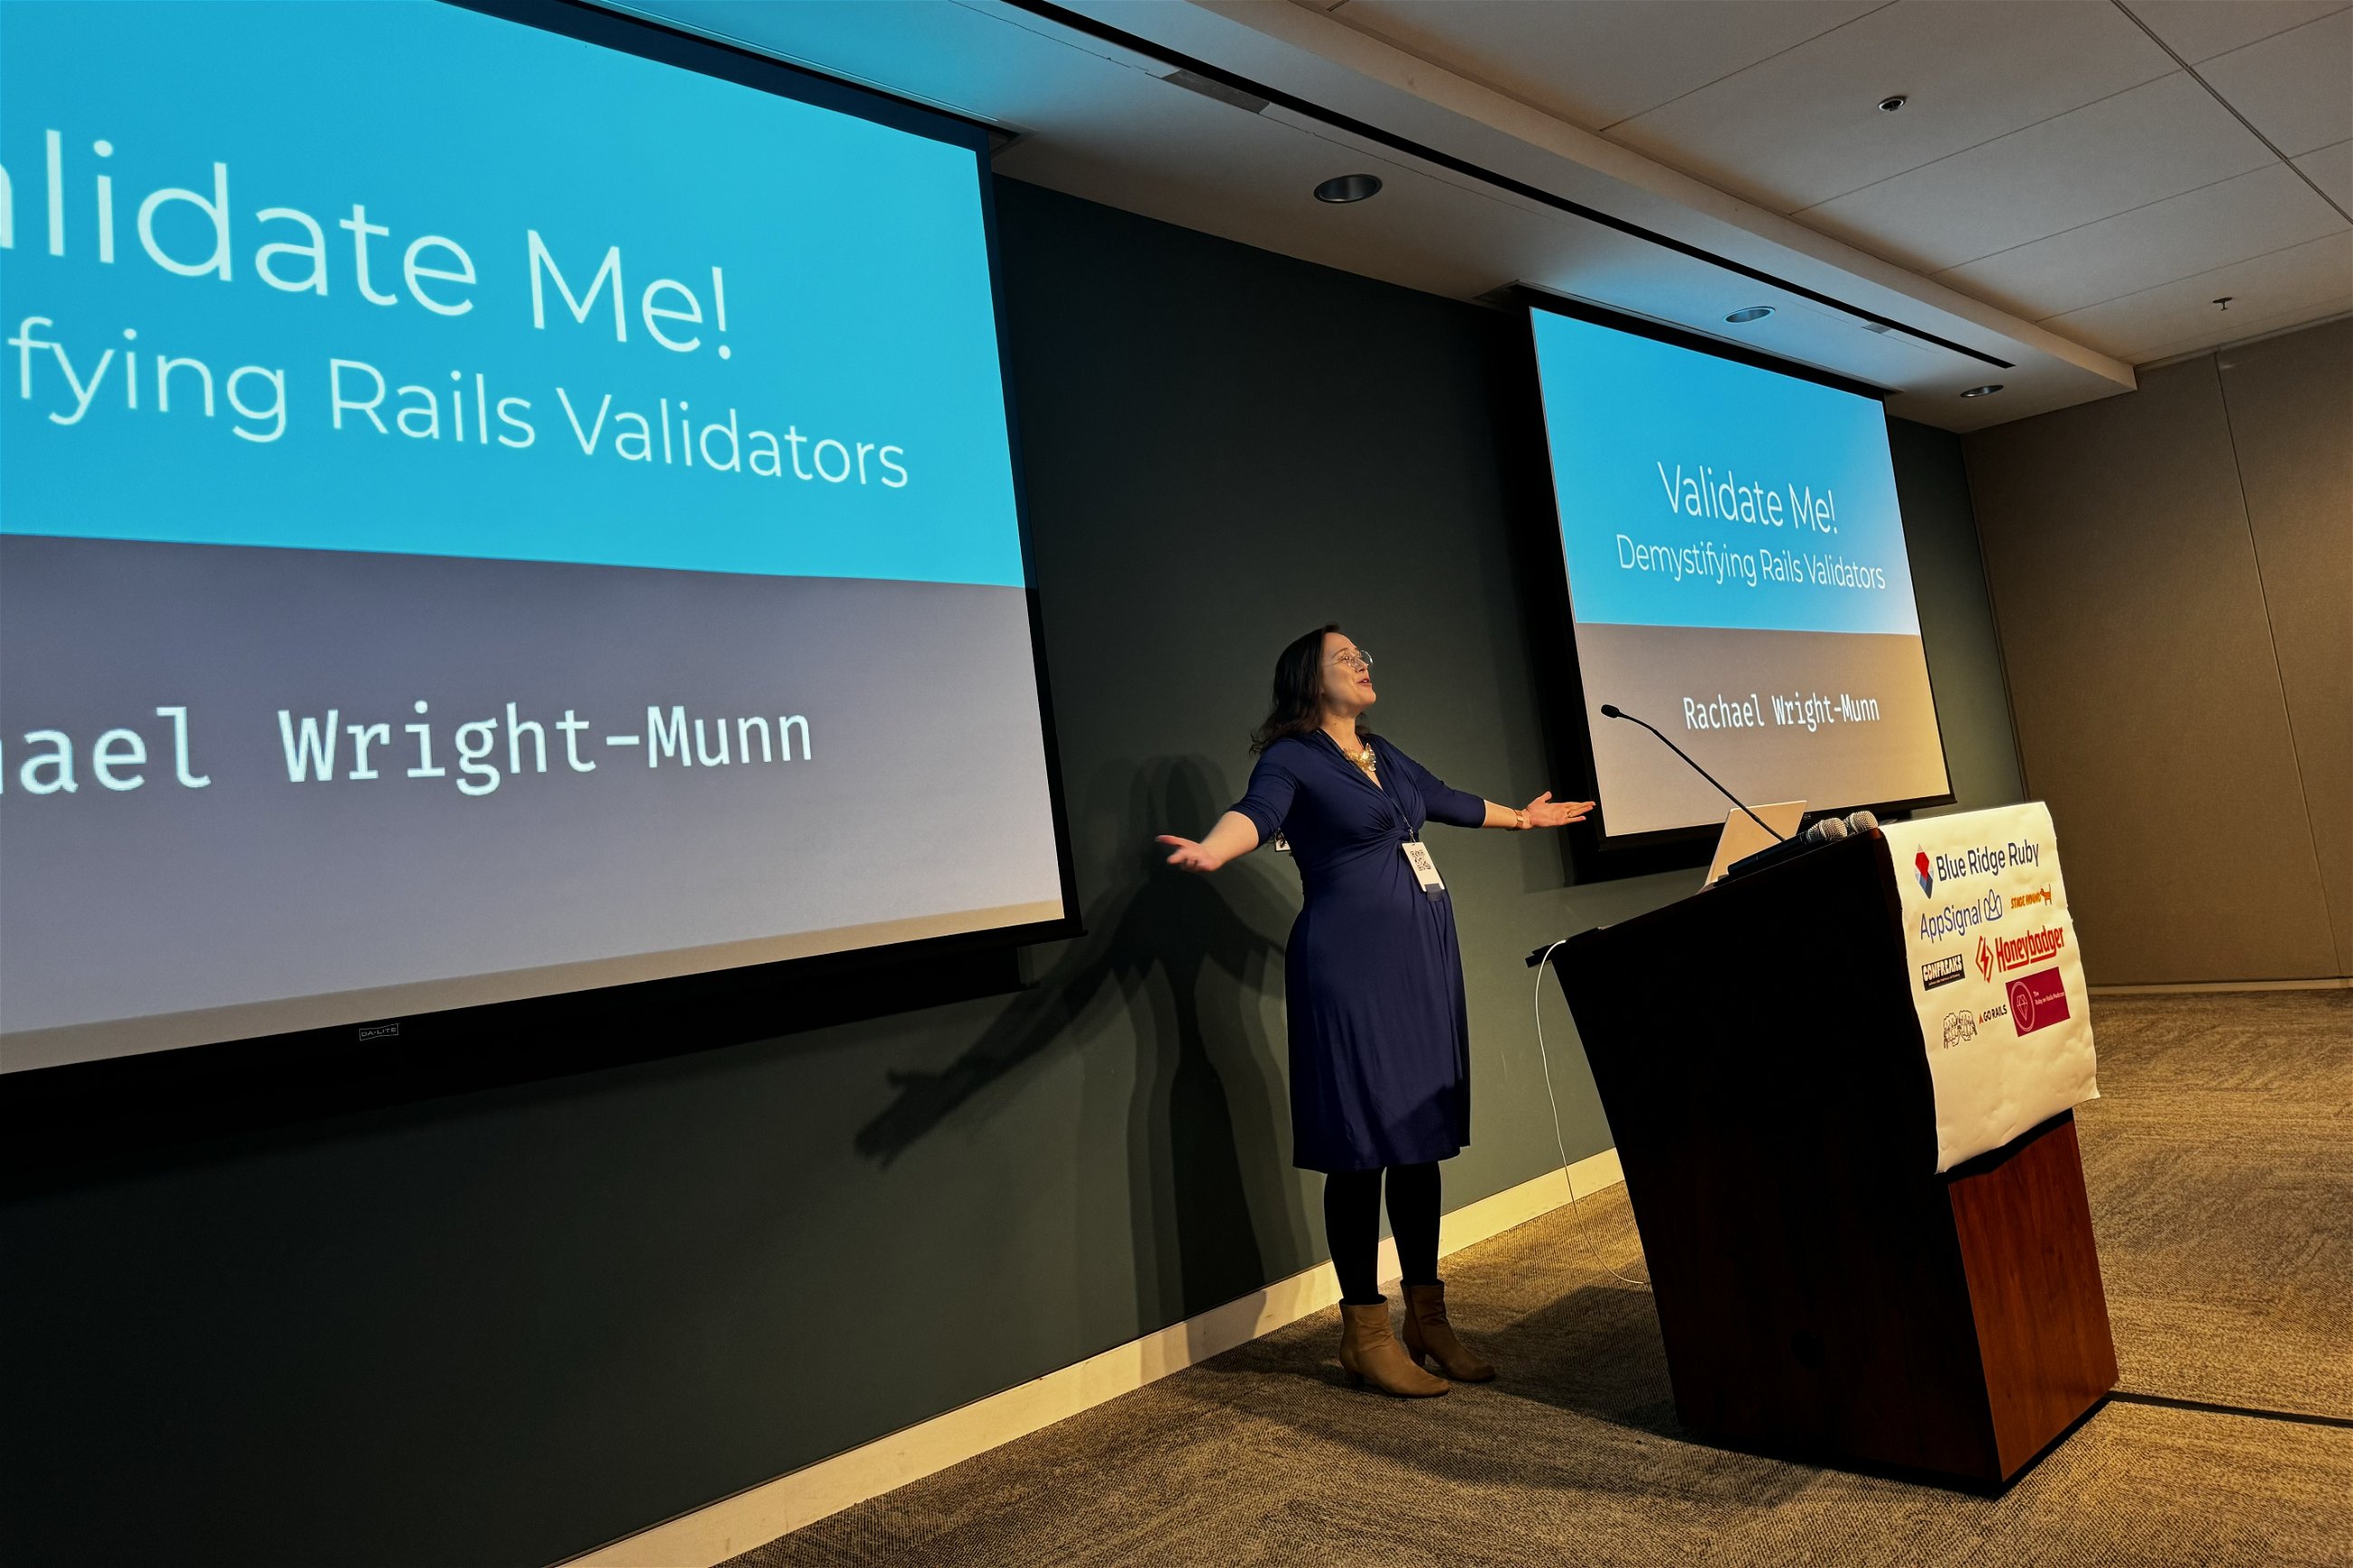 Rachael Wright-Munn presents on "Validate Me! Demystifying Rails Validators" at Blue Ridge Ruby conference, gesturing expressively while addressing the audience, with the presentation title displayed on the screen behind her.